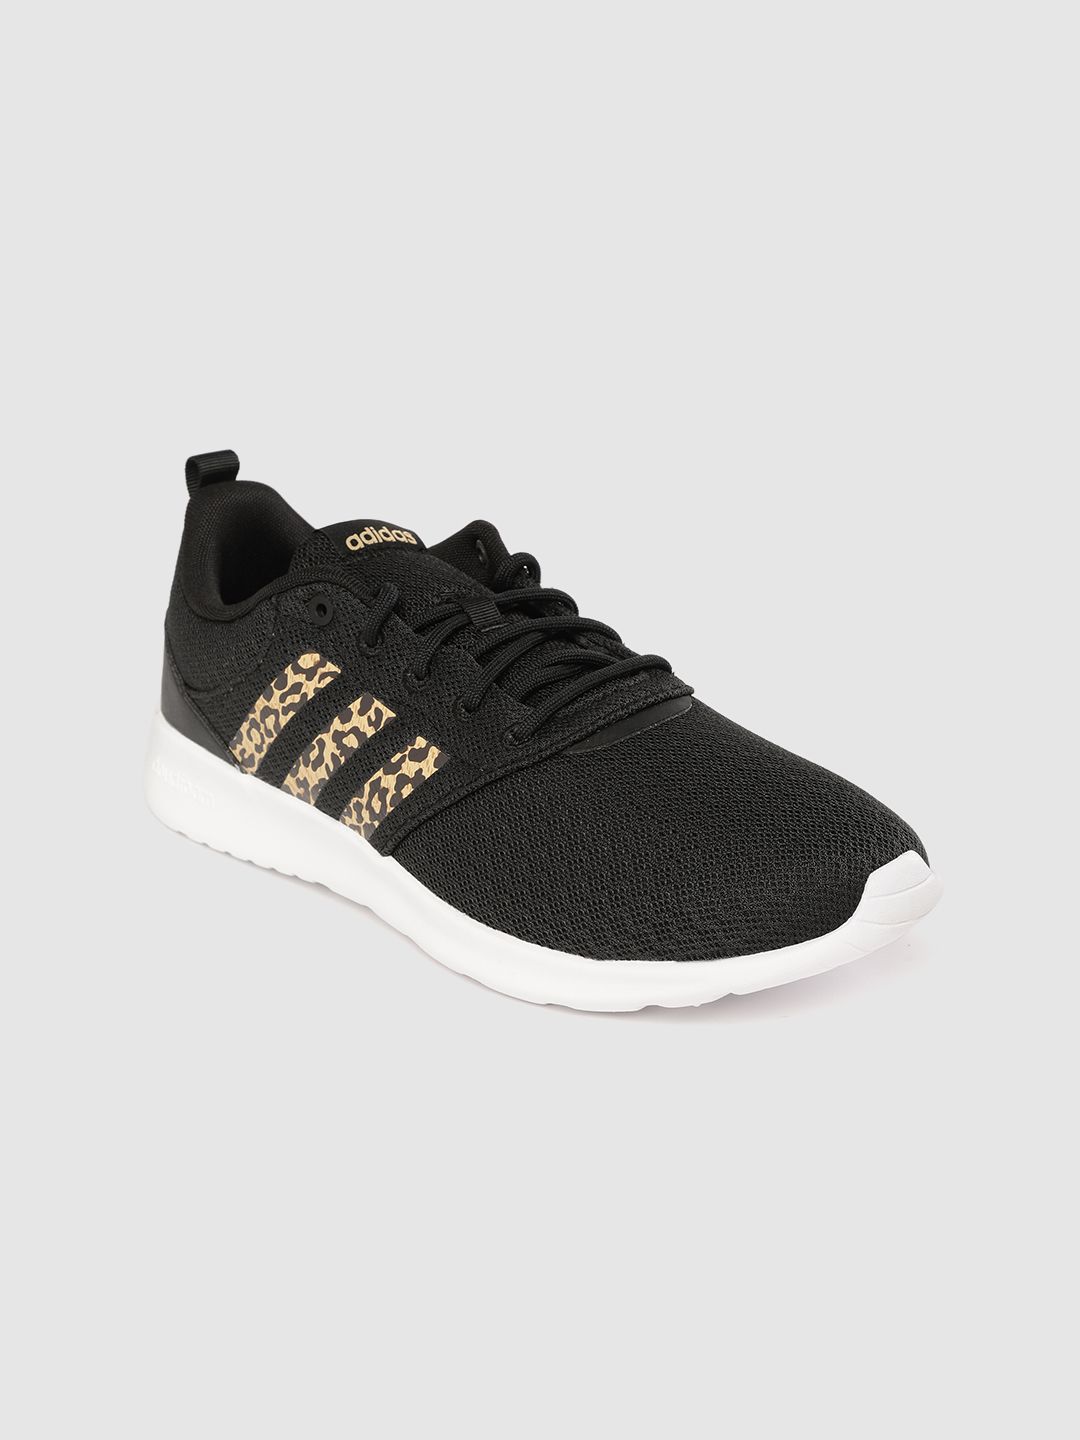 ADIDAS Women Black & Brown QT Racer 2.0 Knitted Running Shoes Price in India